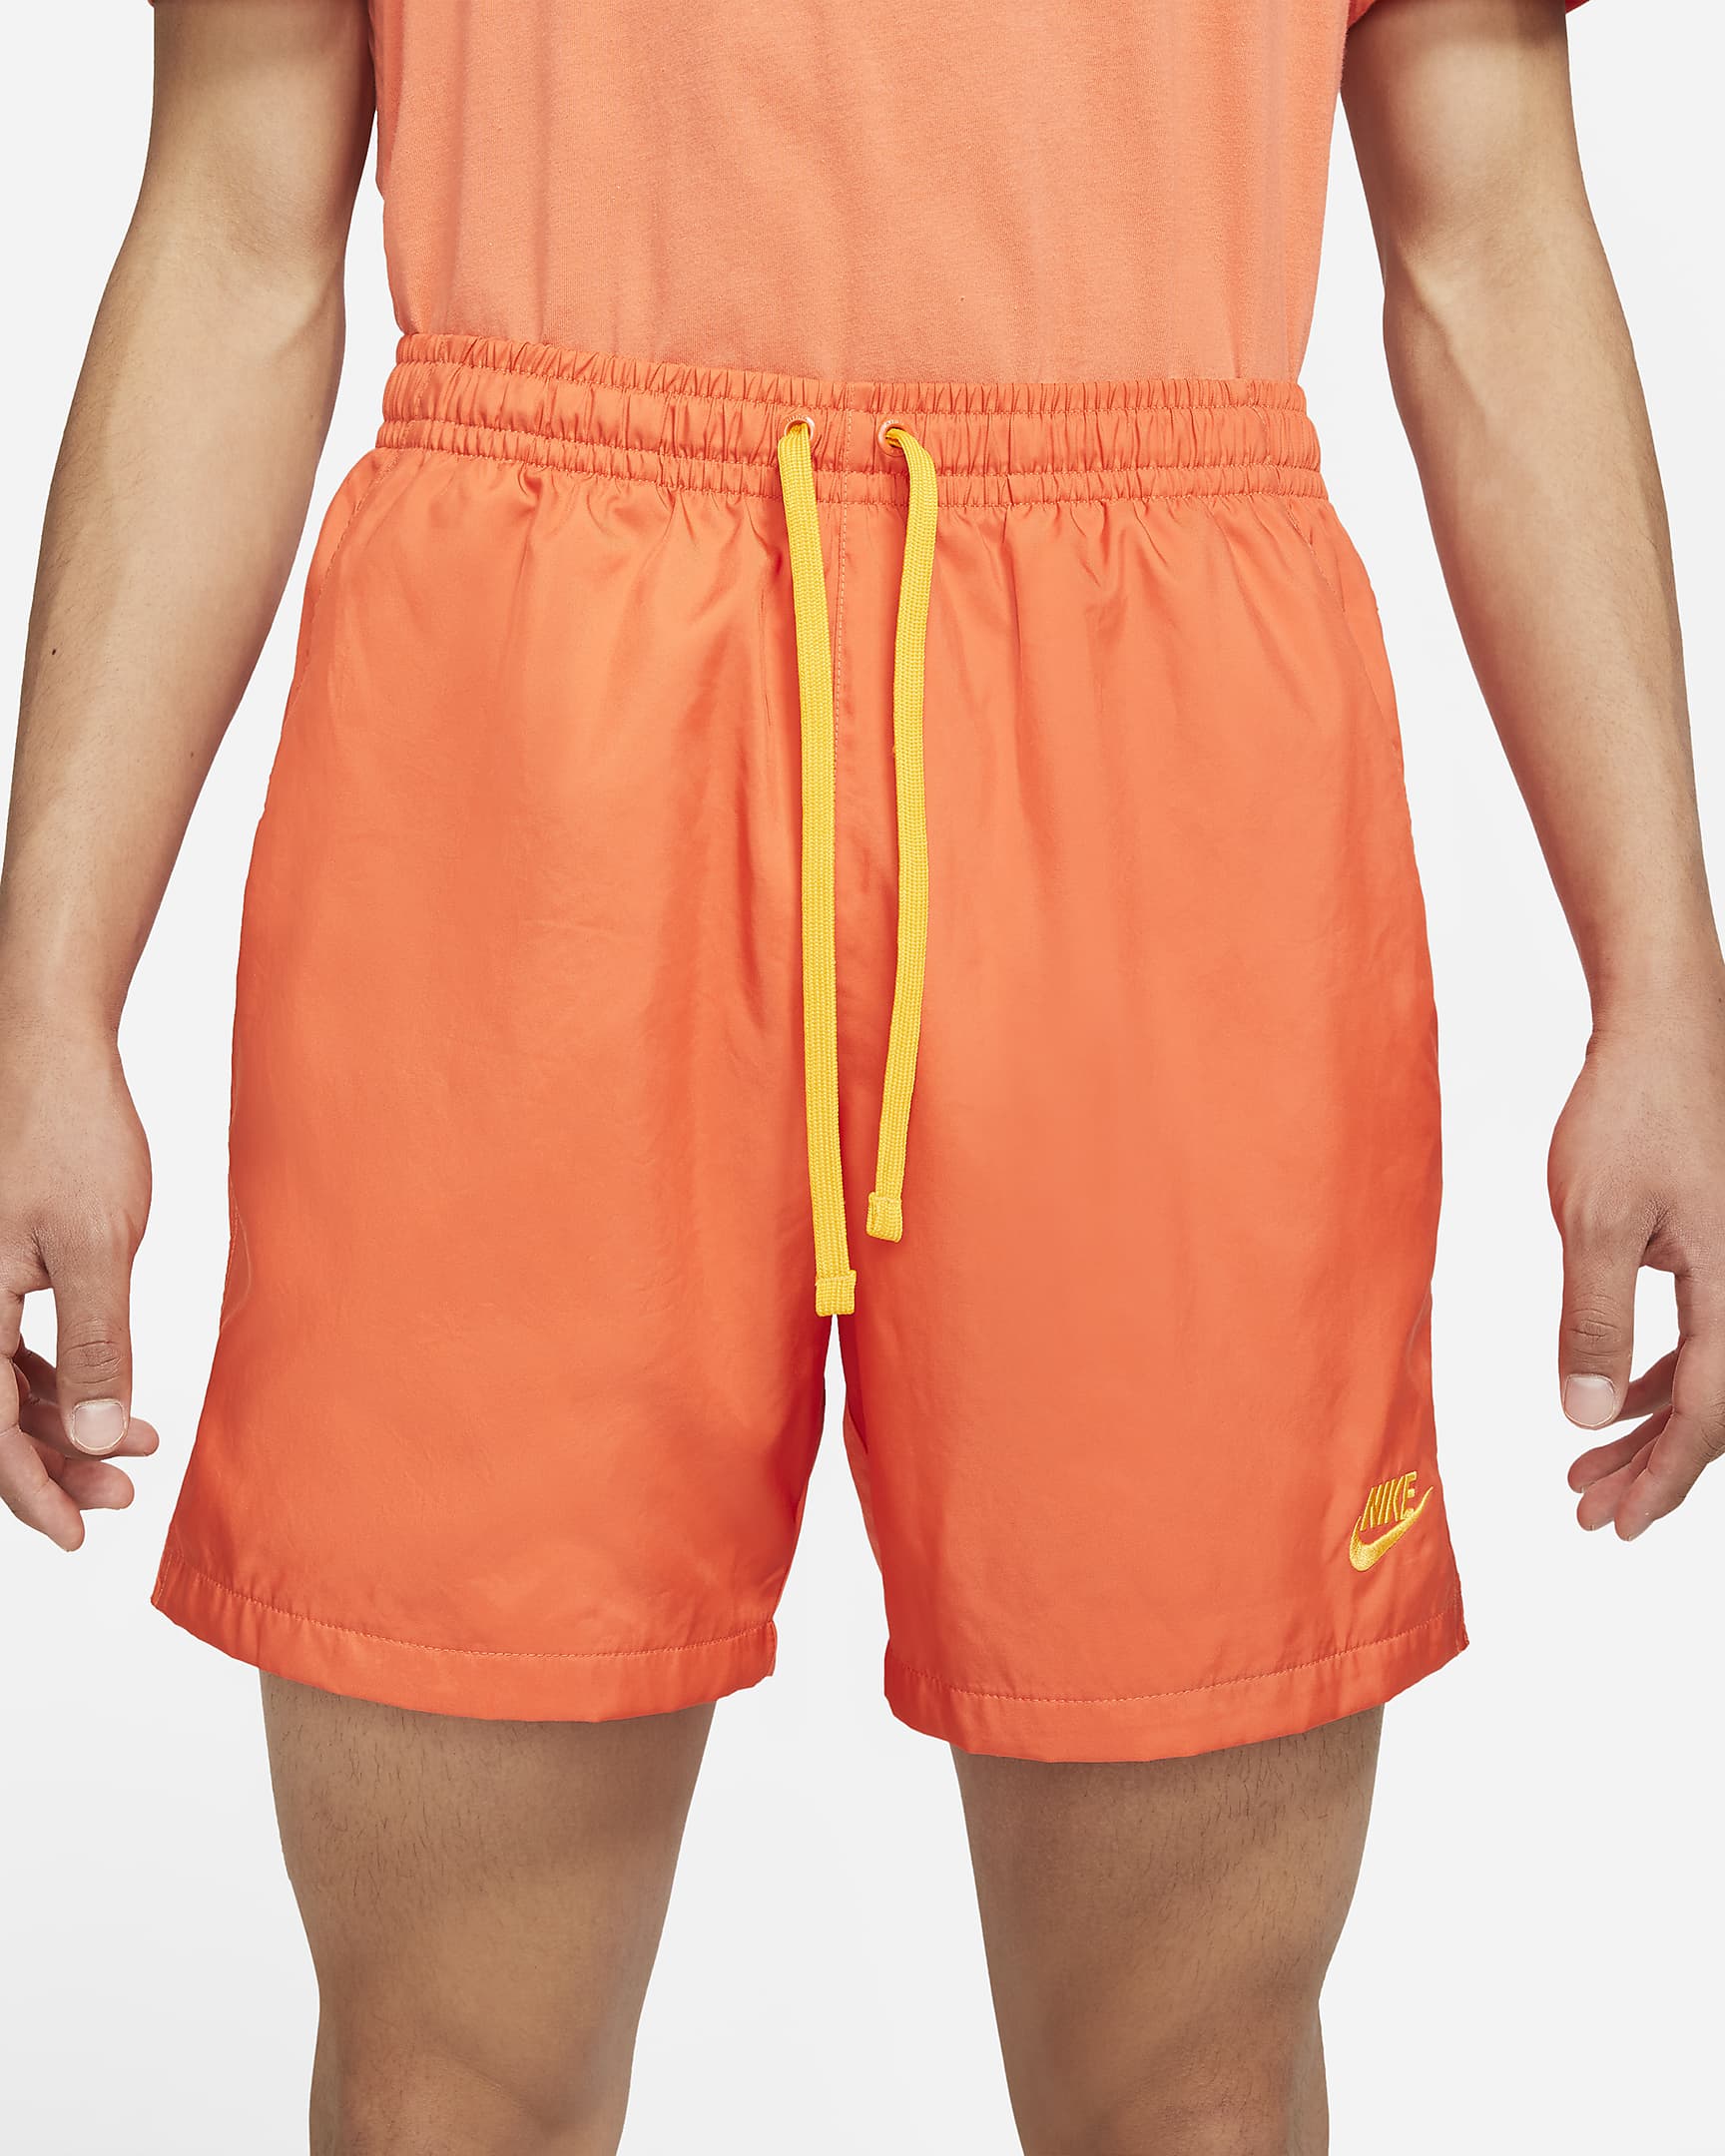 sportswear-mens-woven-shorts-VFft3H.png